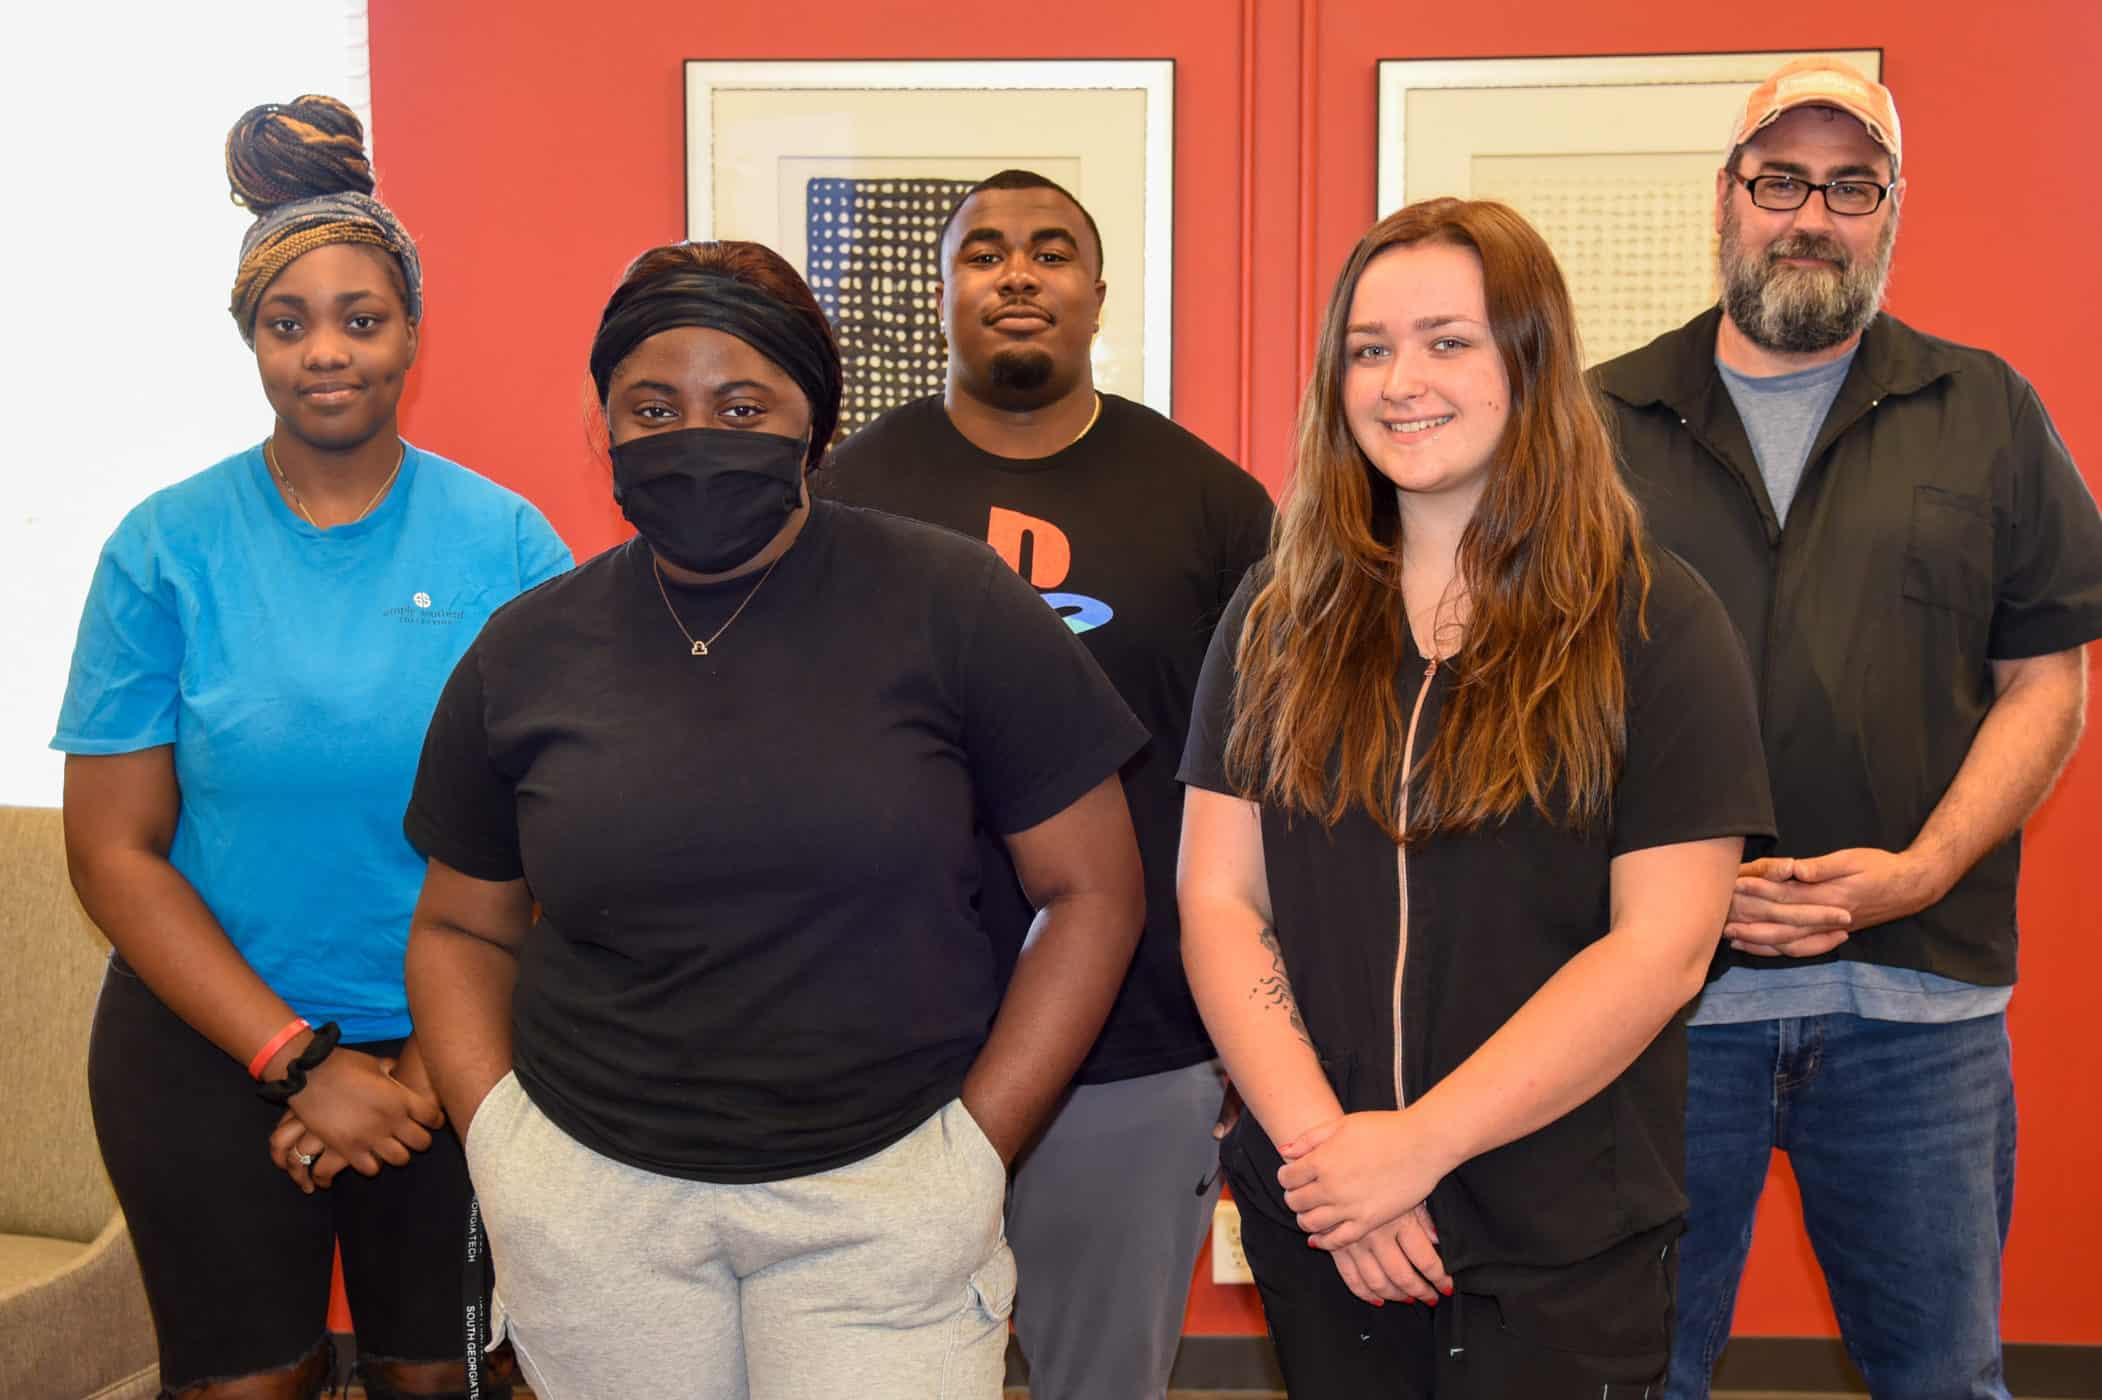 2022-2023 SGTC Student Government Association officers (l-r): Jy’mia Fann, Parliamentarian; Makayla McCant, Reporter; Montavious Angry, Secretary; Anna Rees, Vice President; and Brandon Price, President.